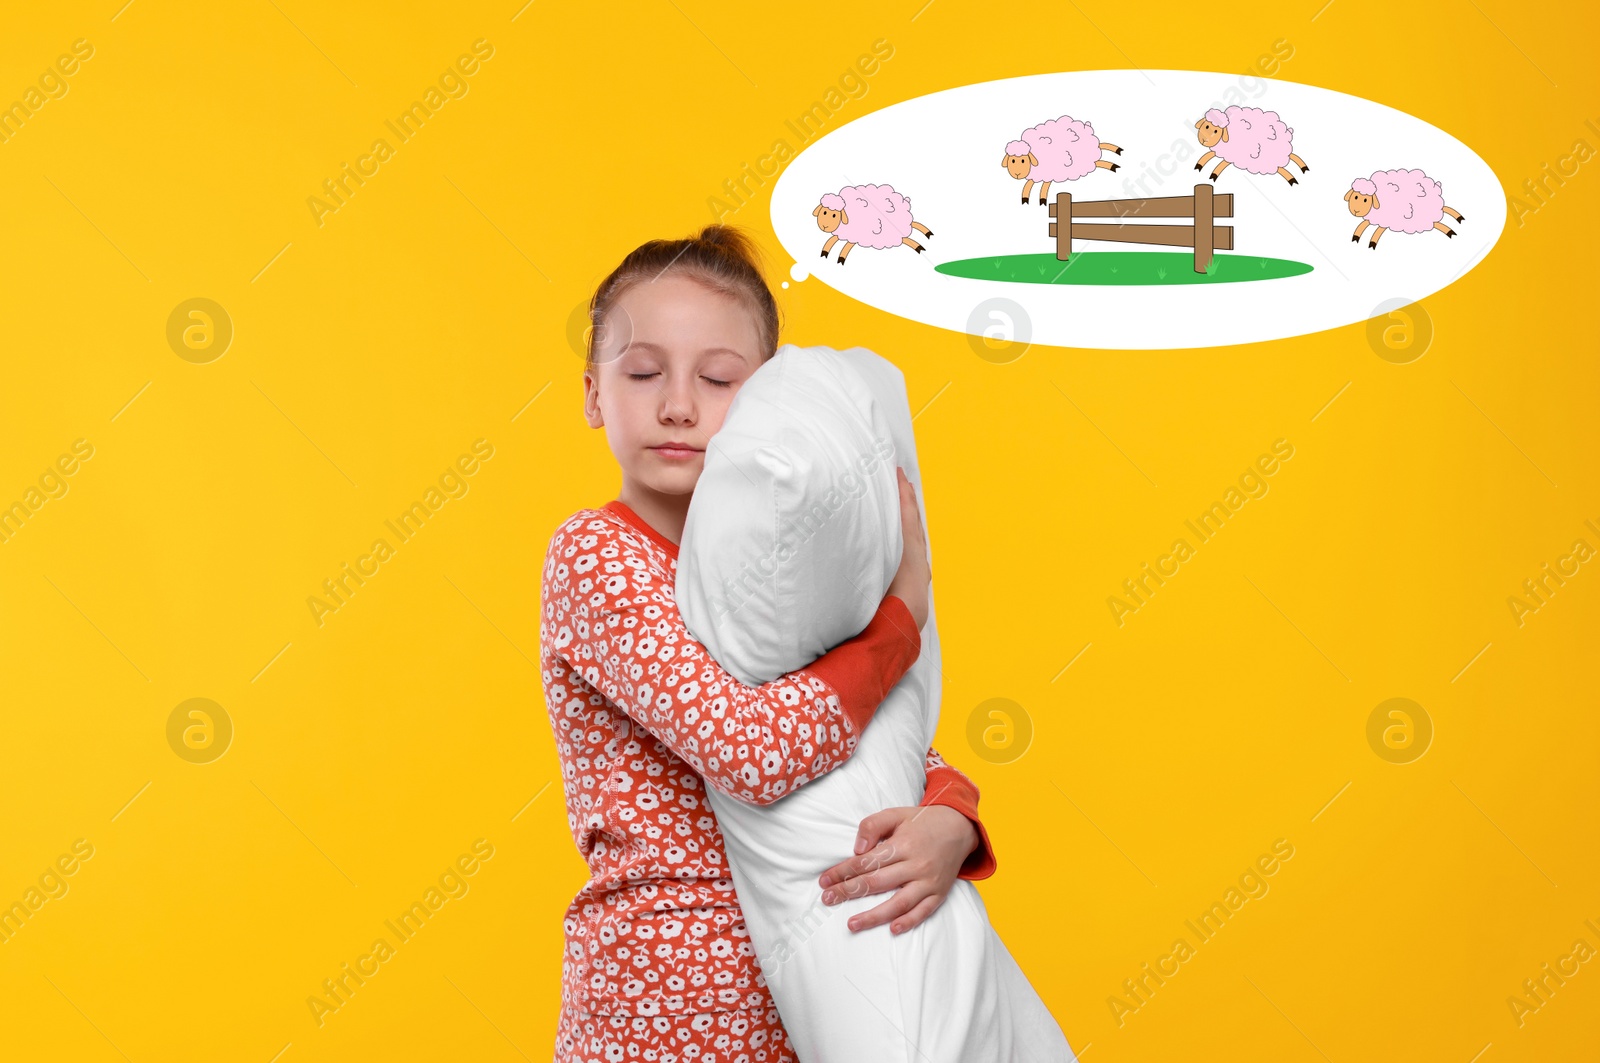 Image of Sleepy girl with pillow suffering from insomnia on orange background. Thought cloud with illustrations of sheep jumping over fence